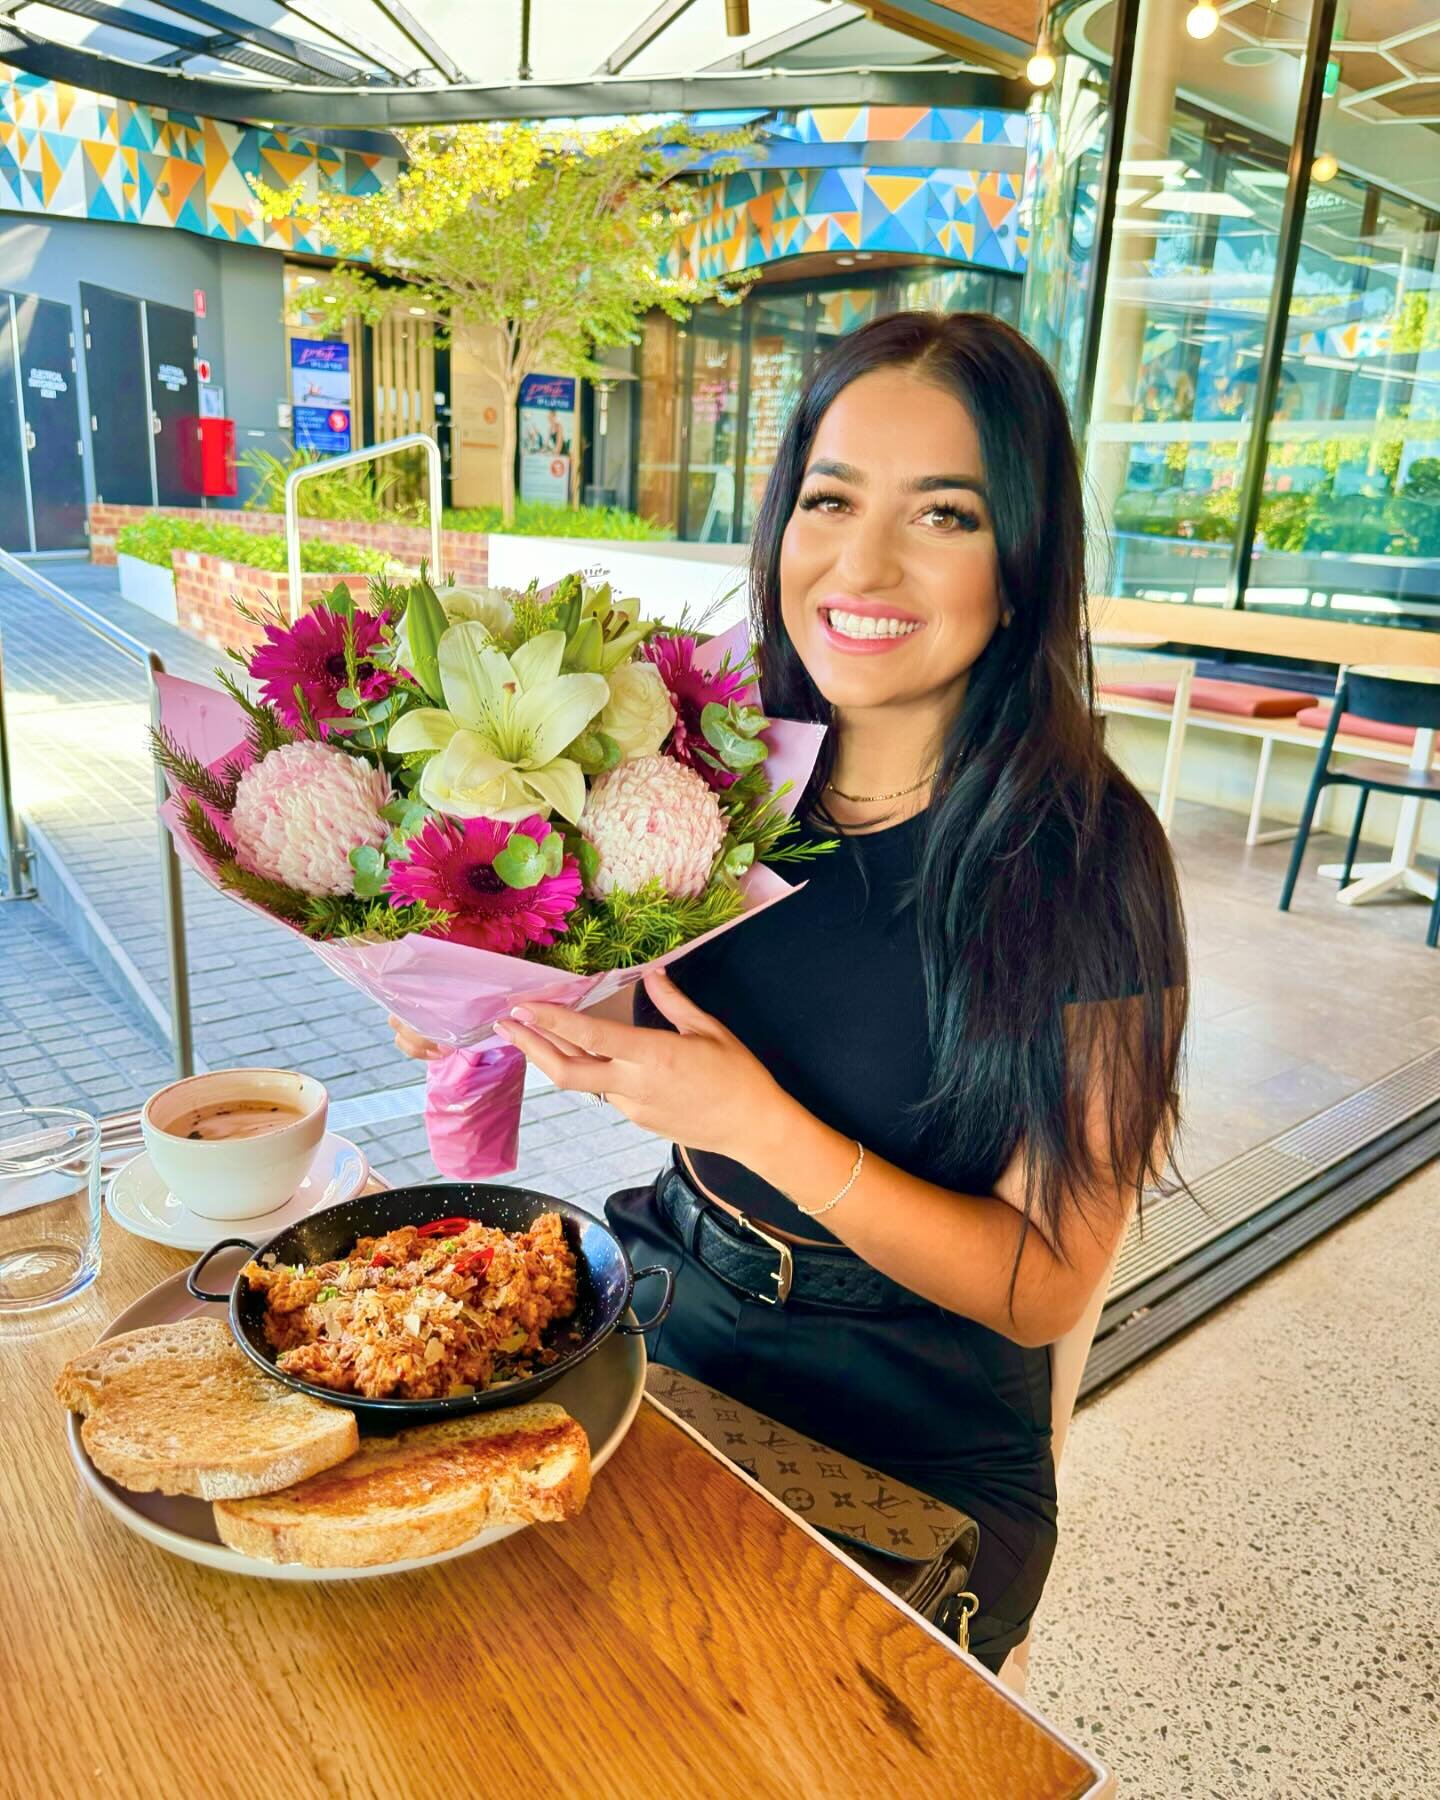 Happy birthday to our dear @sabsharif we hope you feel as special as you are! Our team and patients truly appreciate all you do for us. Thank you for your dedication and hard work through all these years, we love you ❤️
Drop her a HBD message in the 